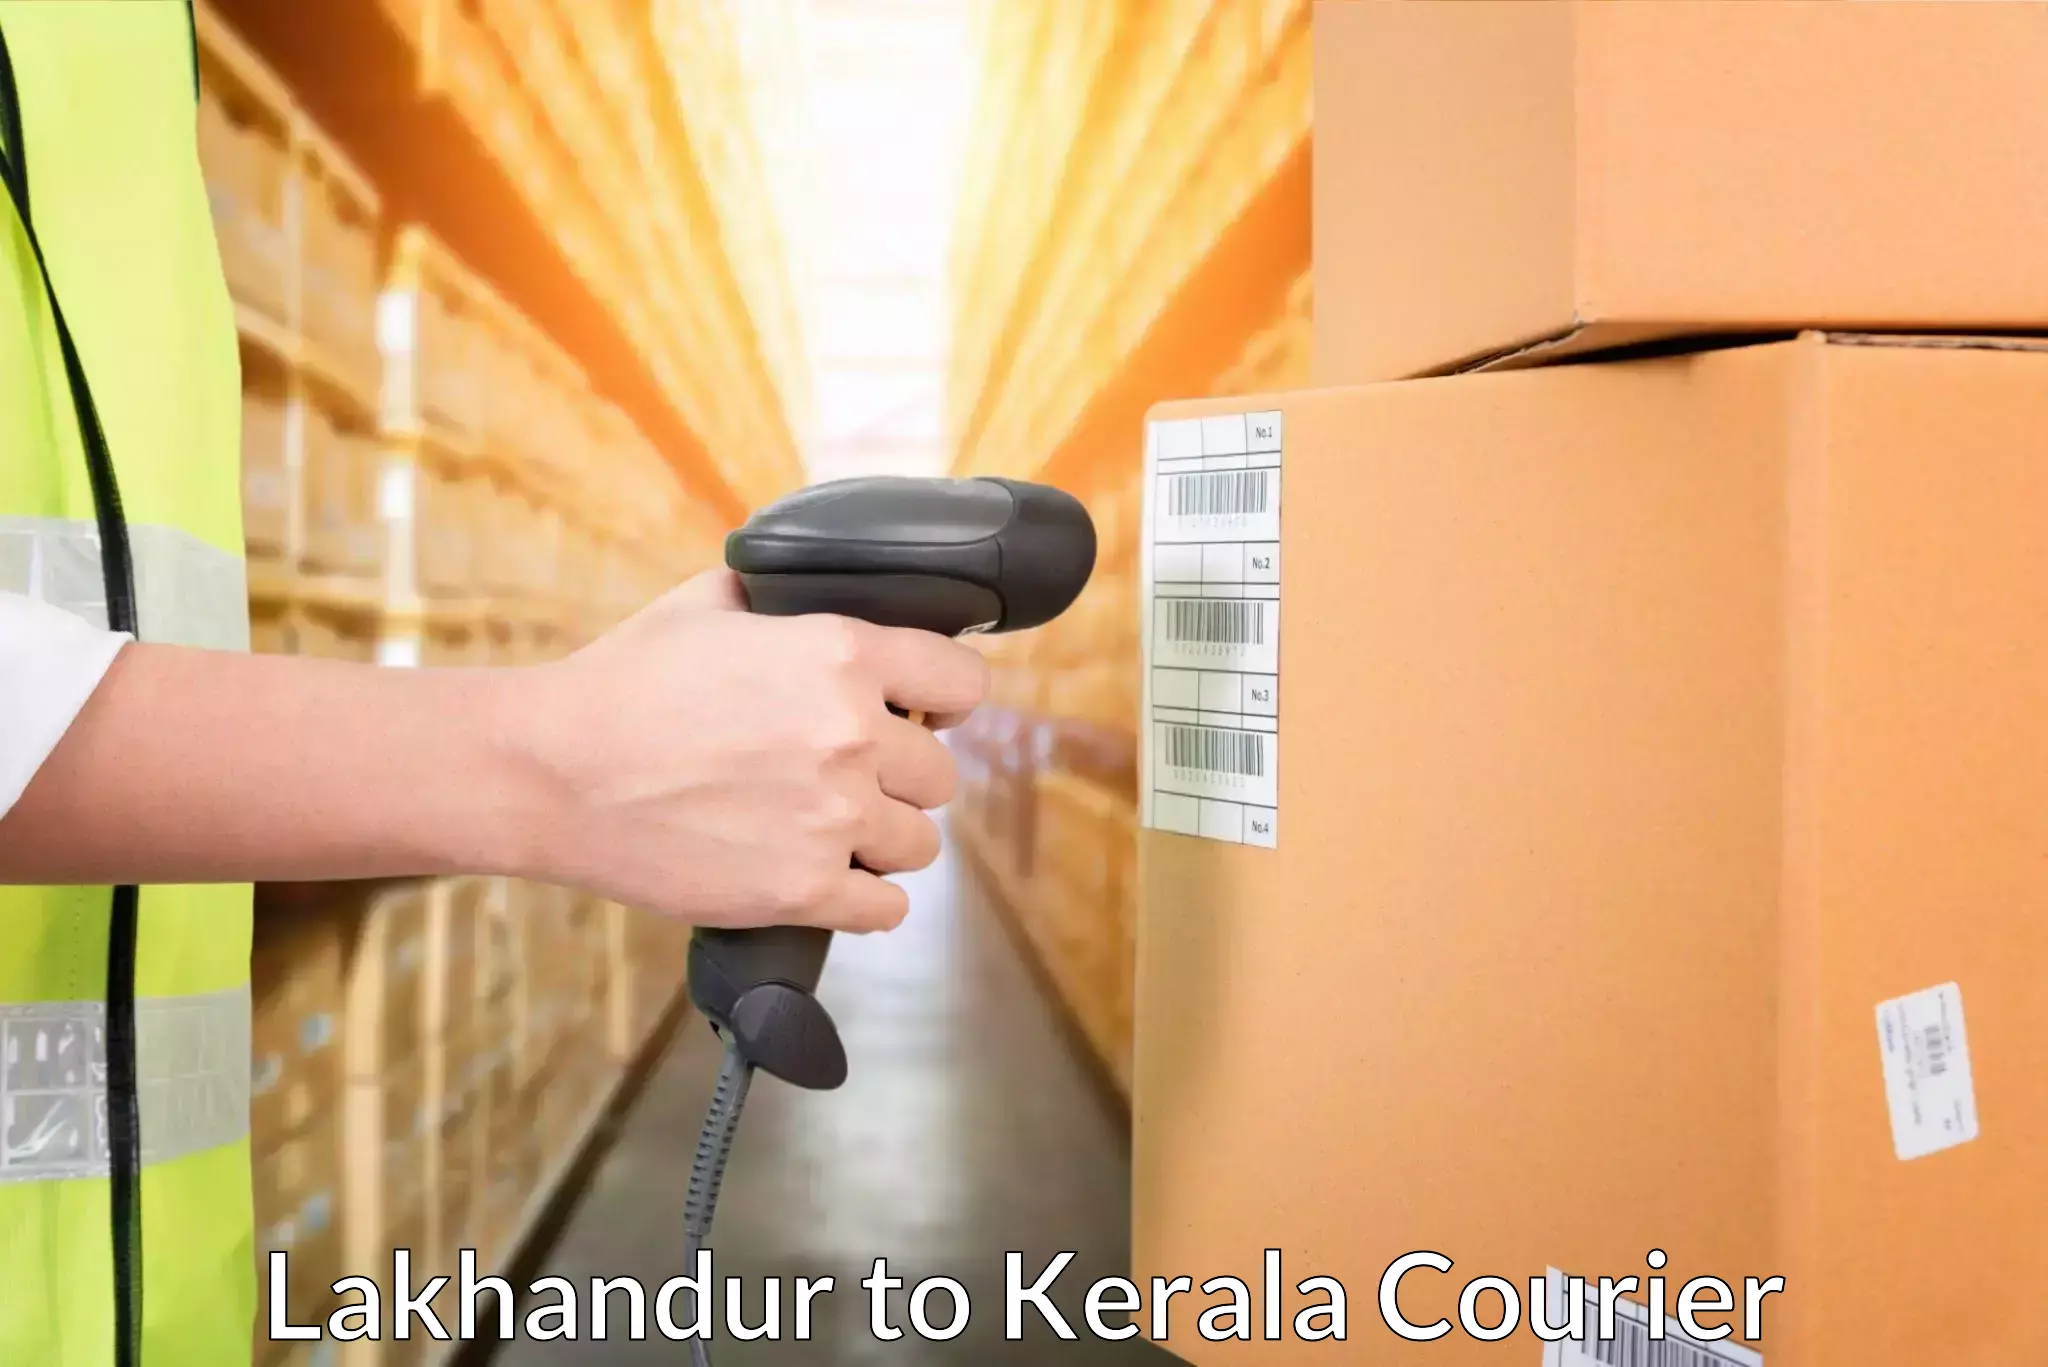 Cash on delivery service Lakhandur to Angamaly